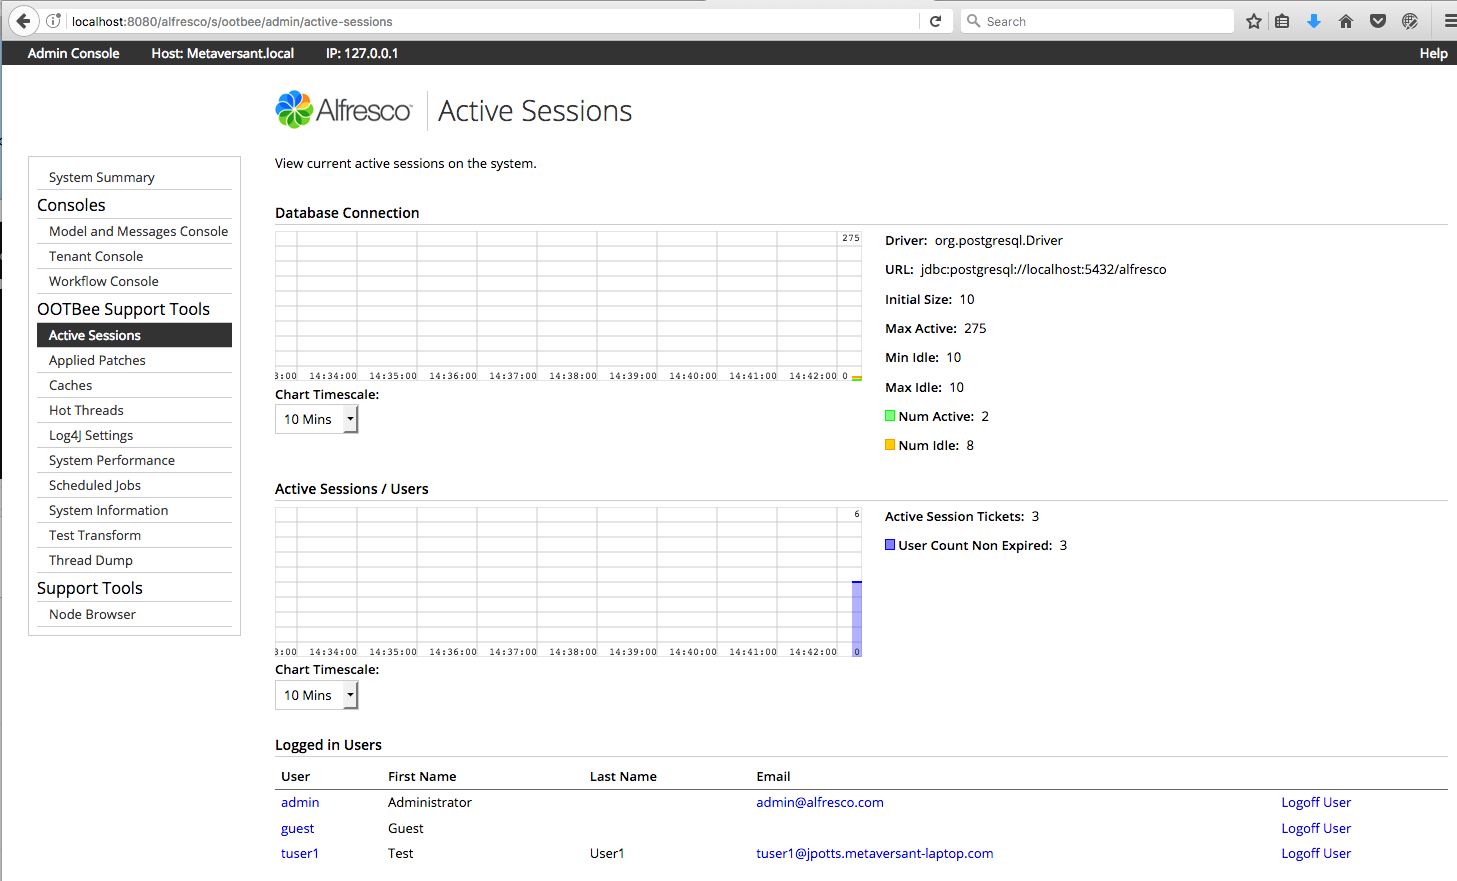 Screenshot of Support Tools Active Sessions